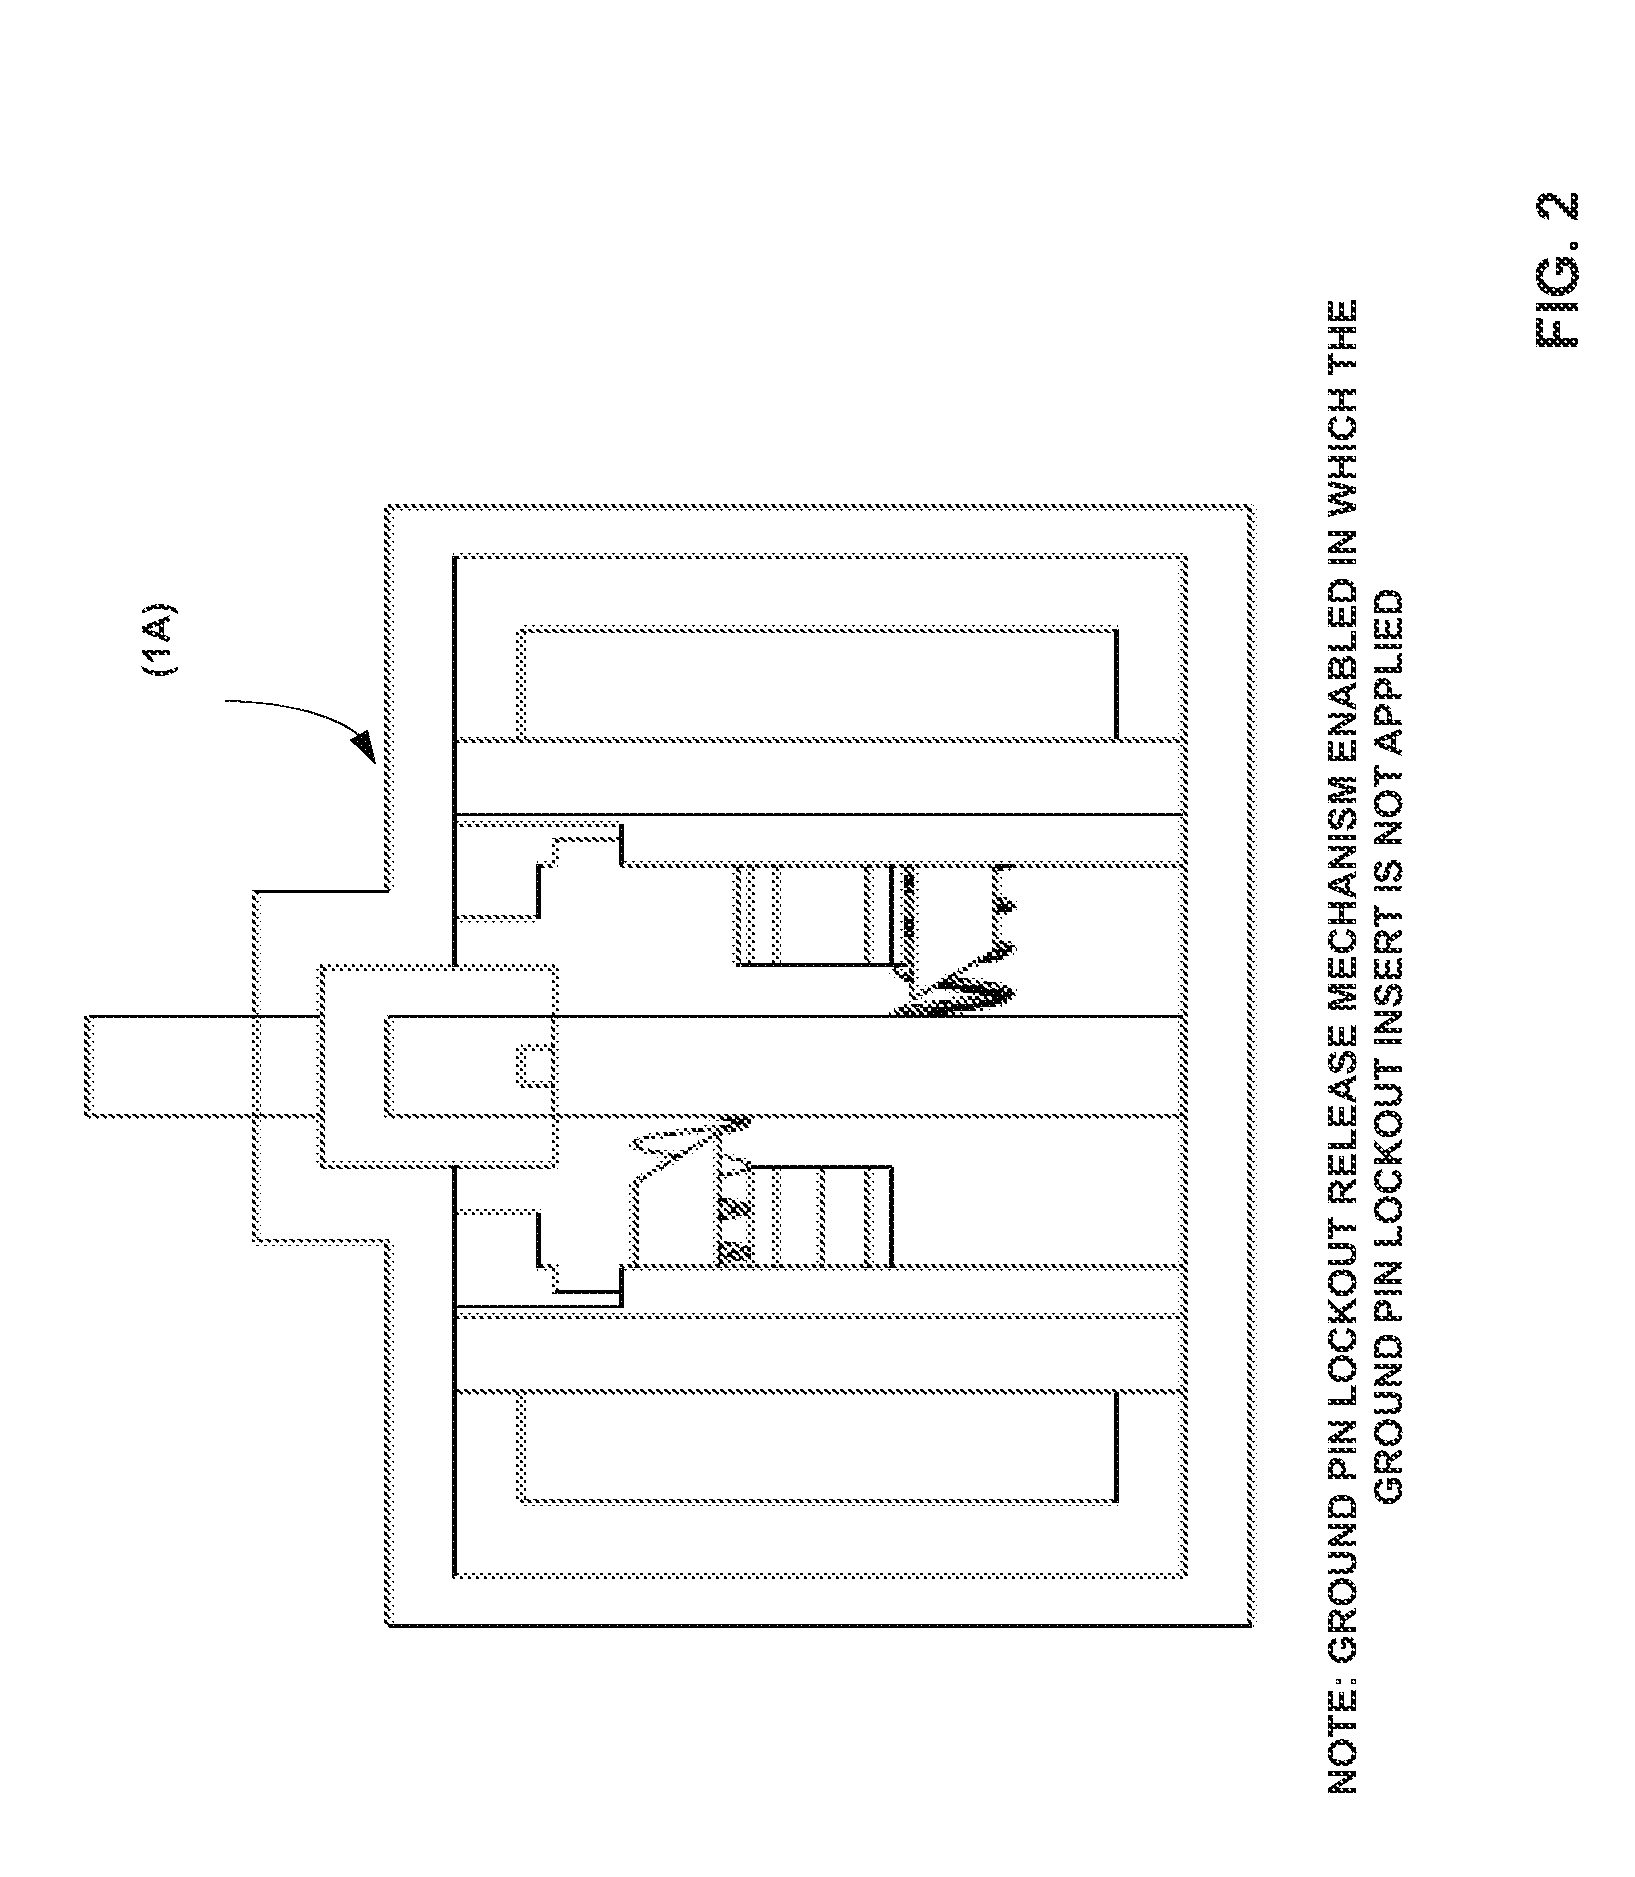 Tamper Resistant Shutter Device for Electrical Receptacle Outlets